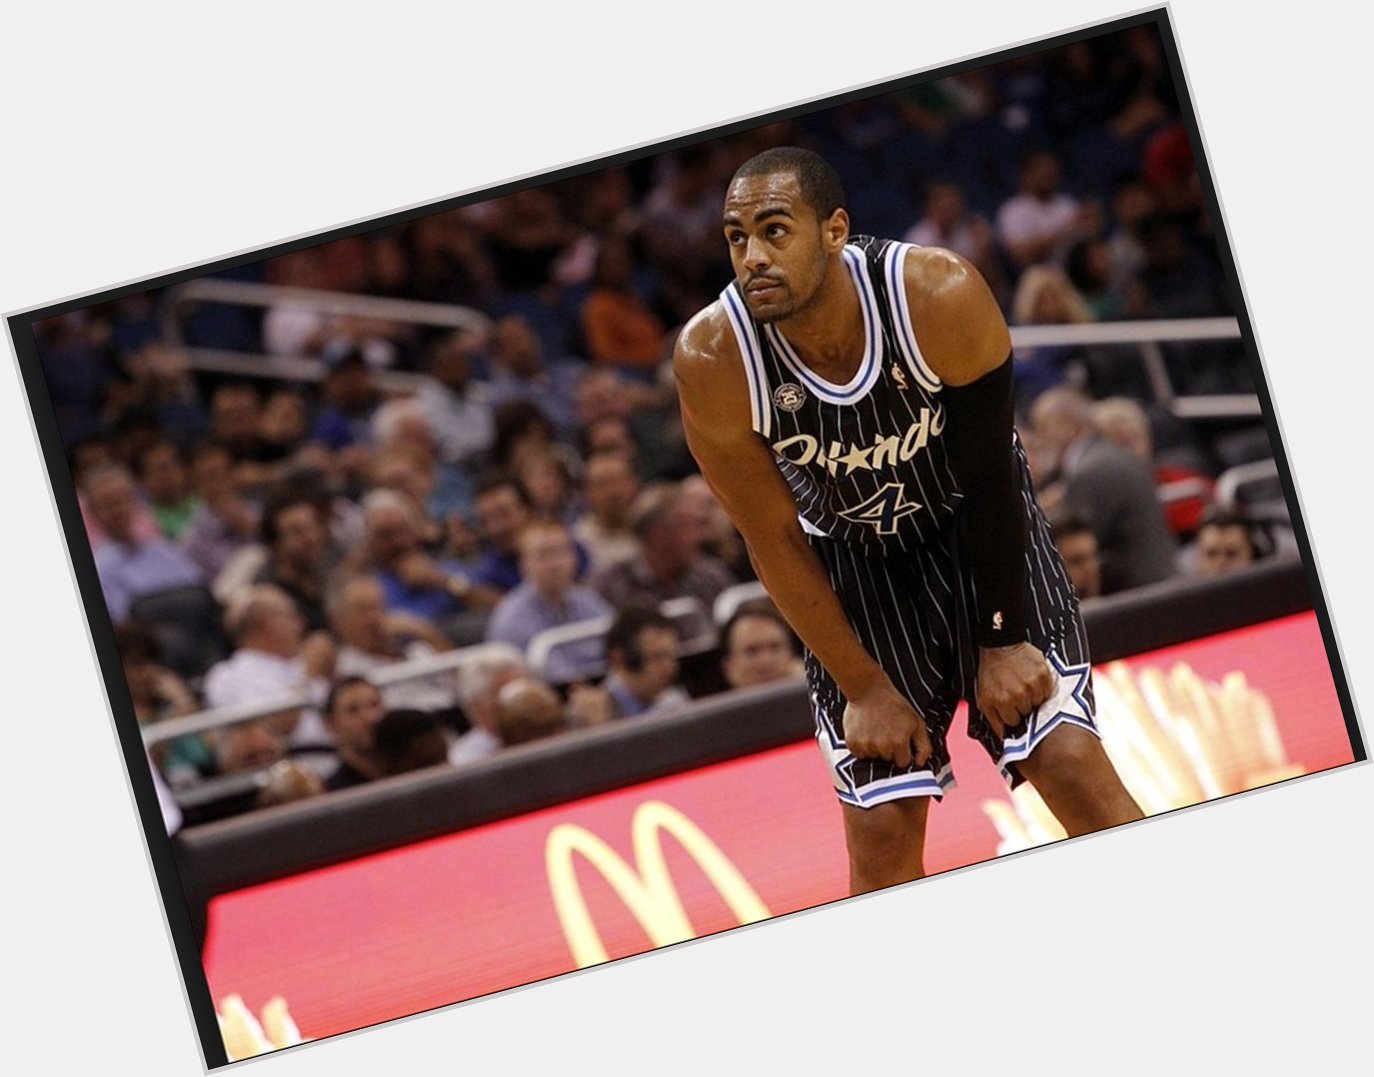 32 years old today. Returned to Orlando. Can get buckets and play great D. Happy birthday to Arron Afflalo! 